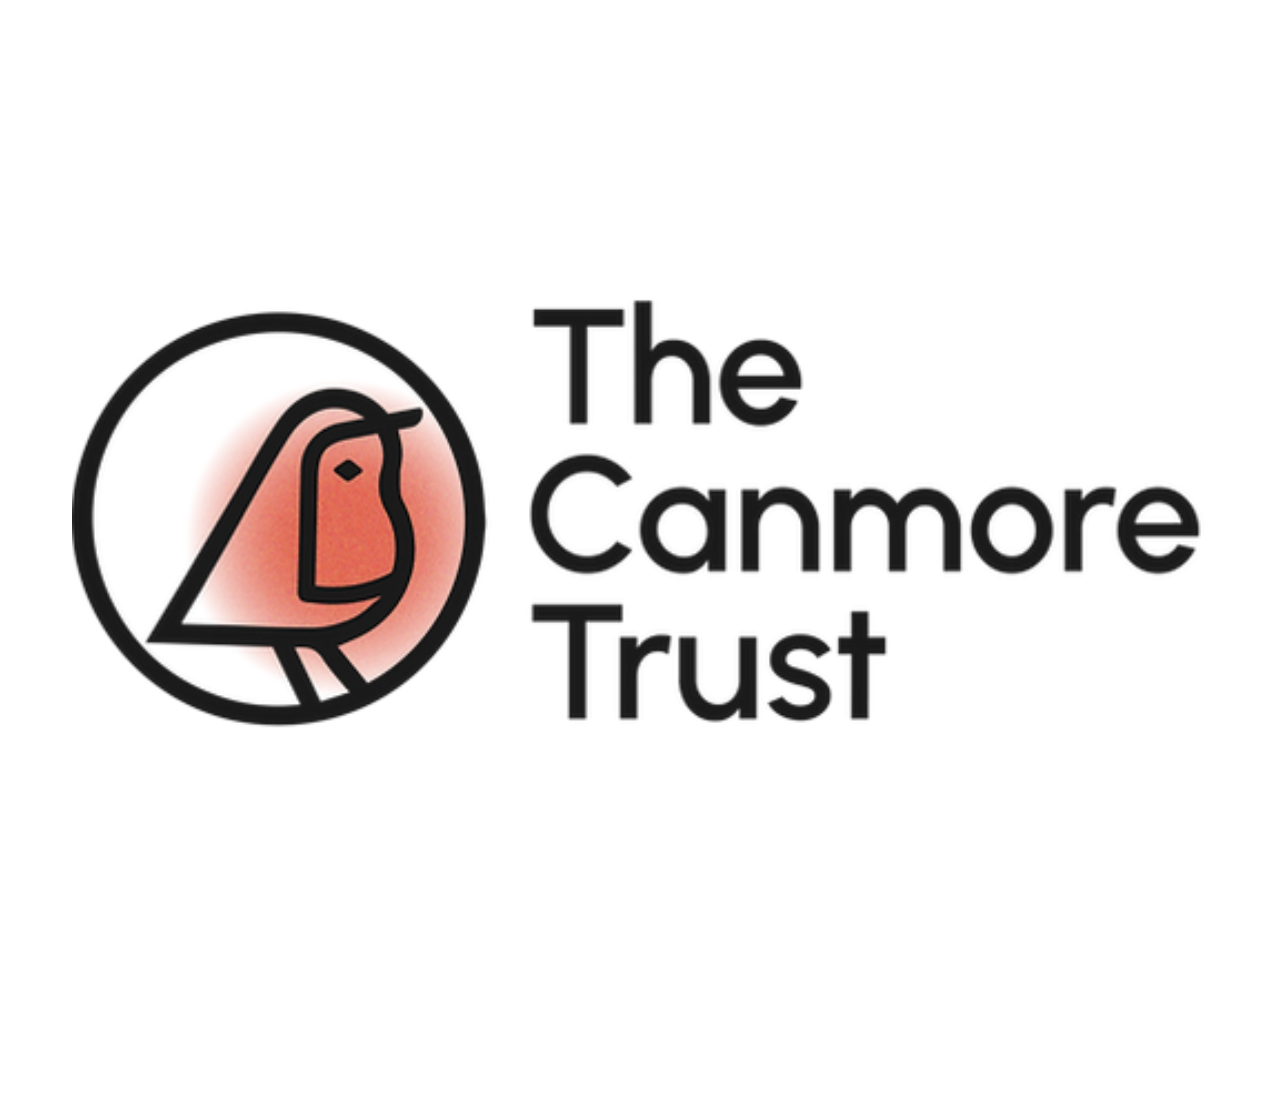 The Canmore Trust logo